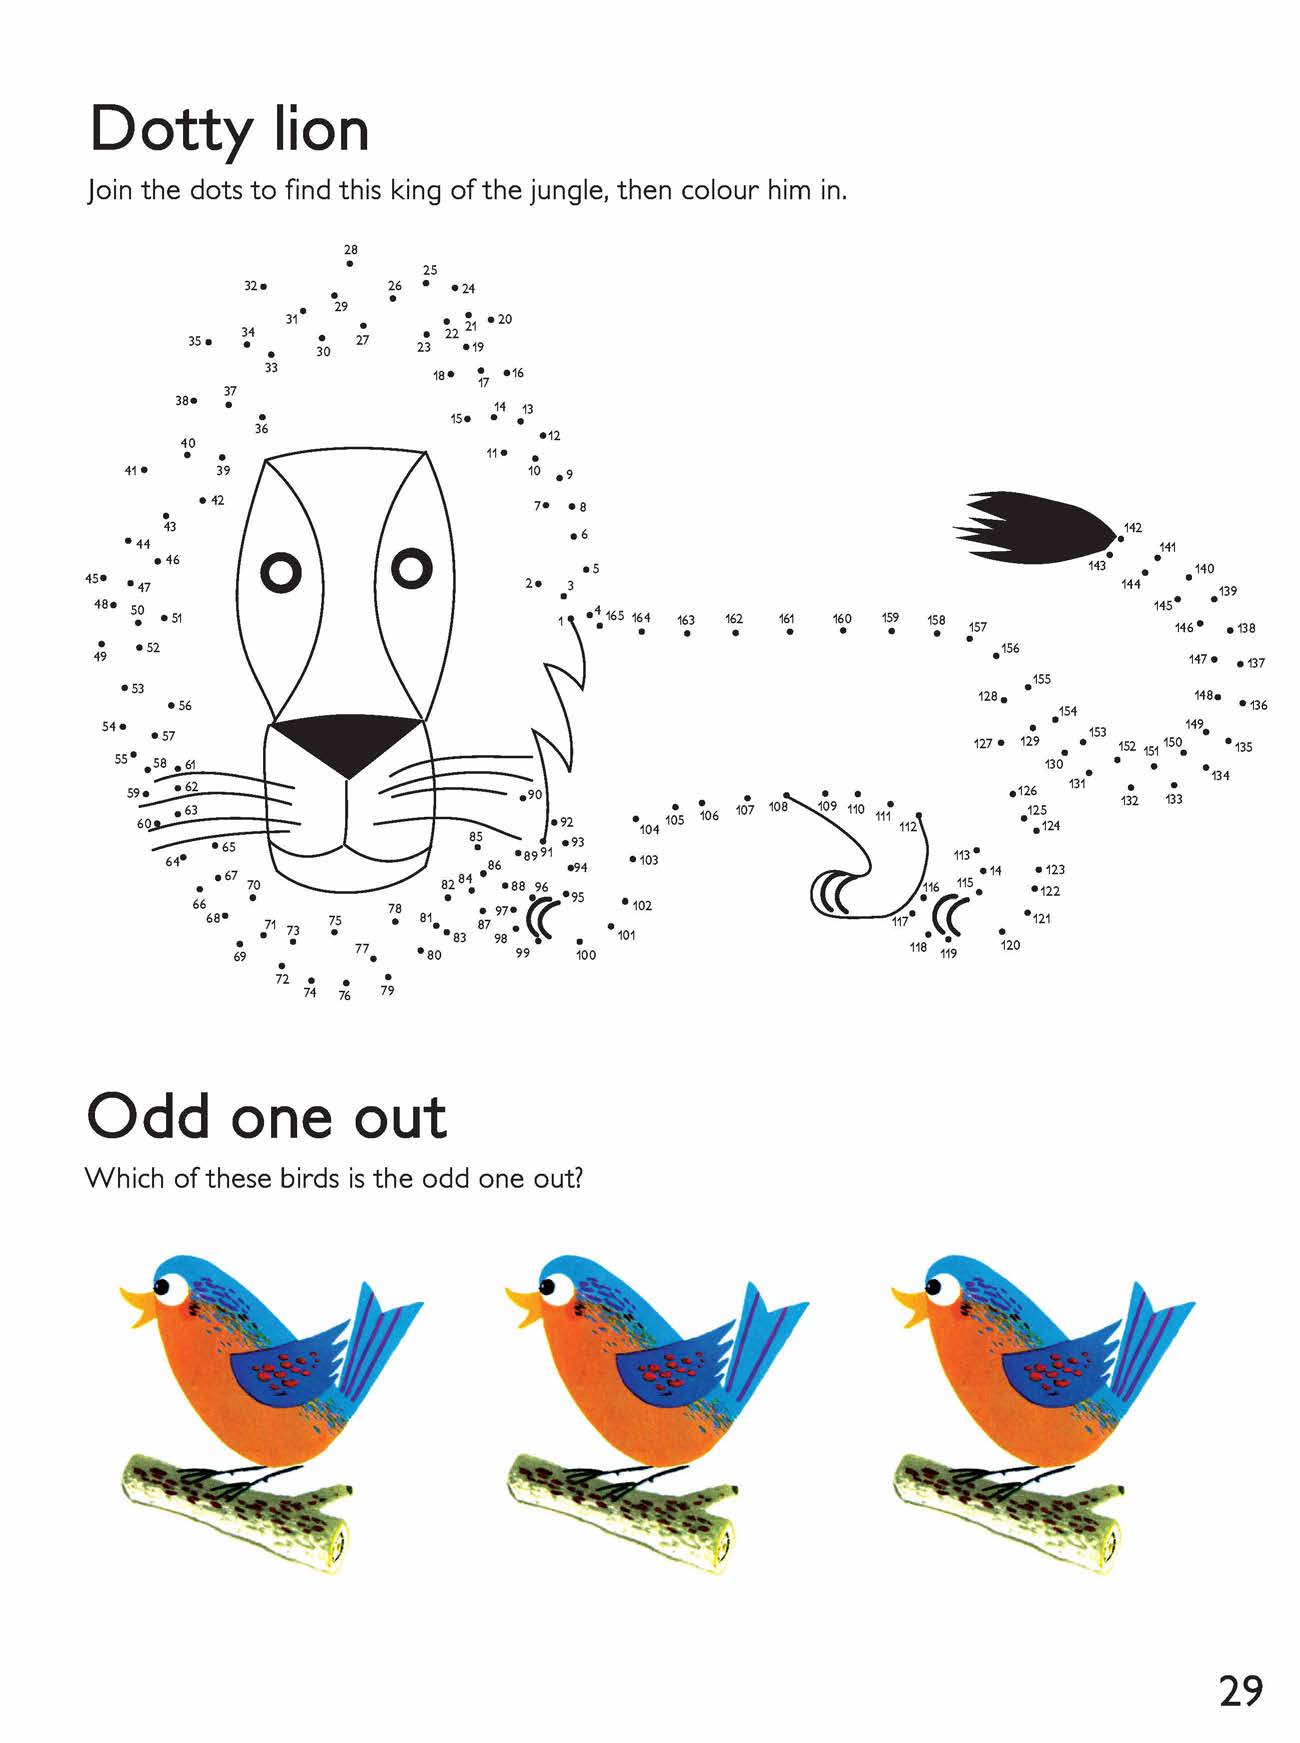 Dotty Lion and Odd One Out Activity Sheet  image